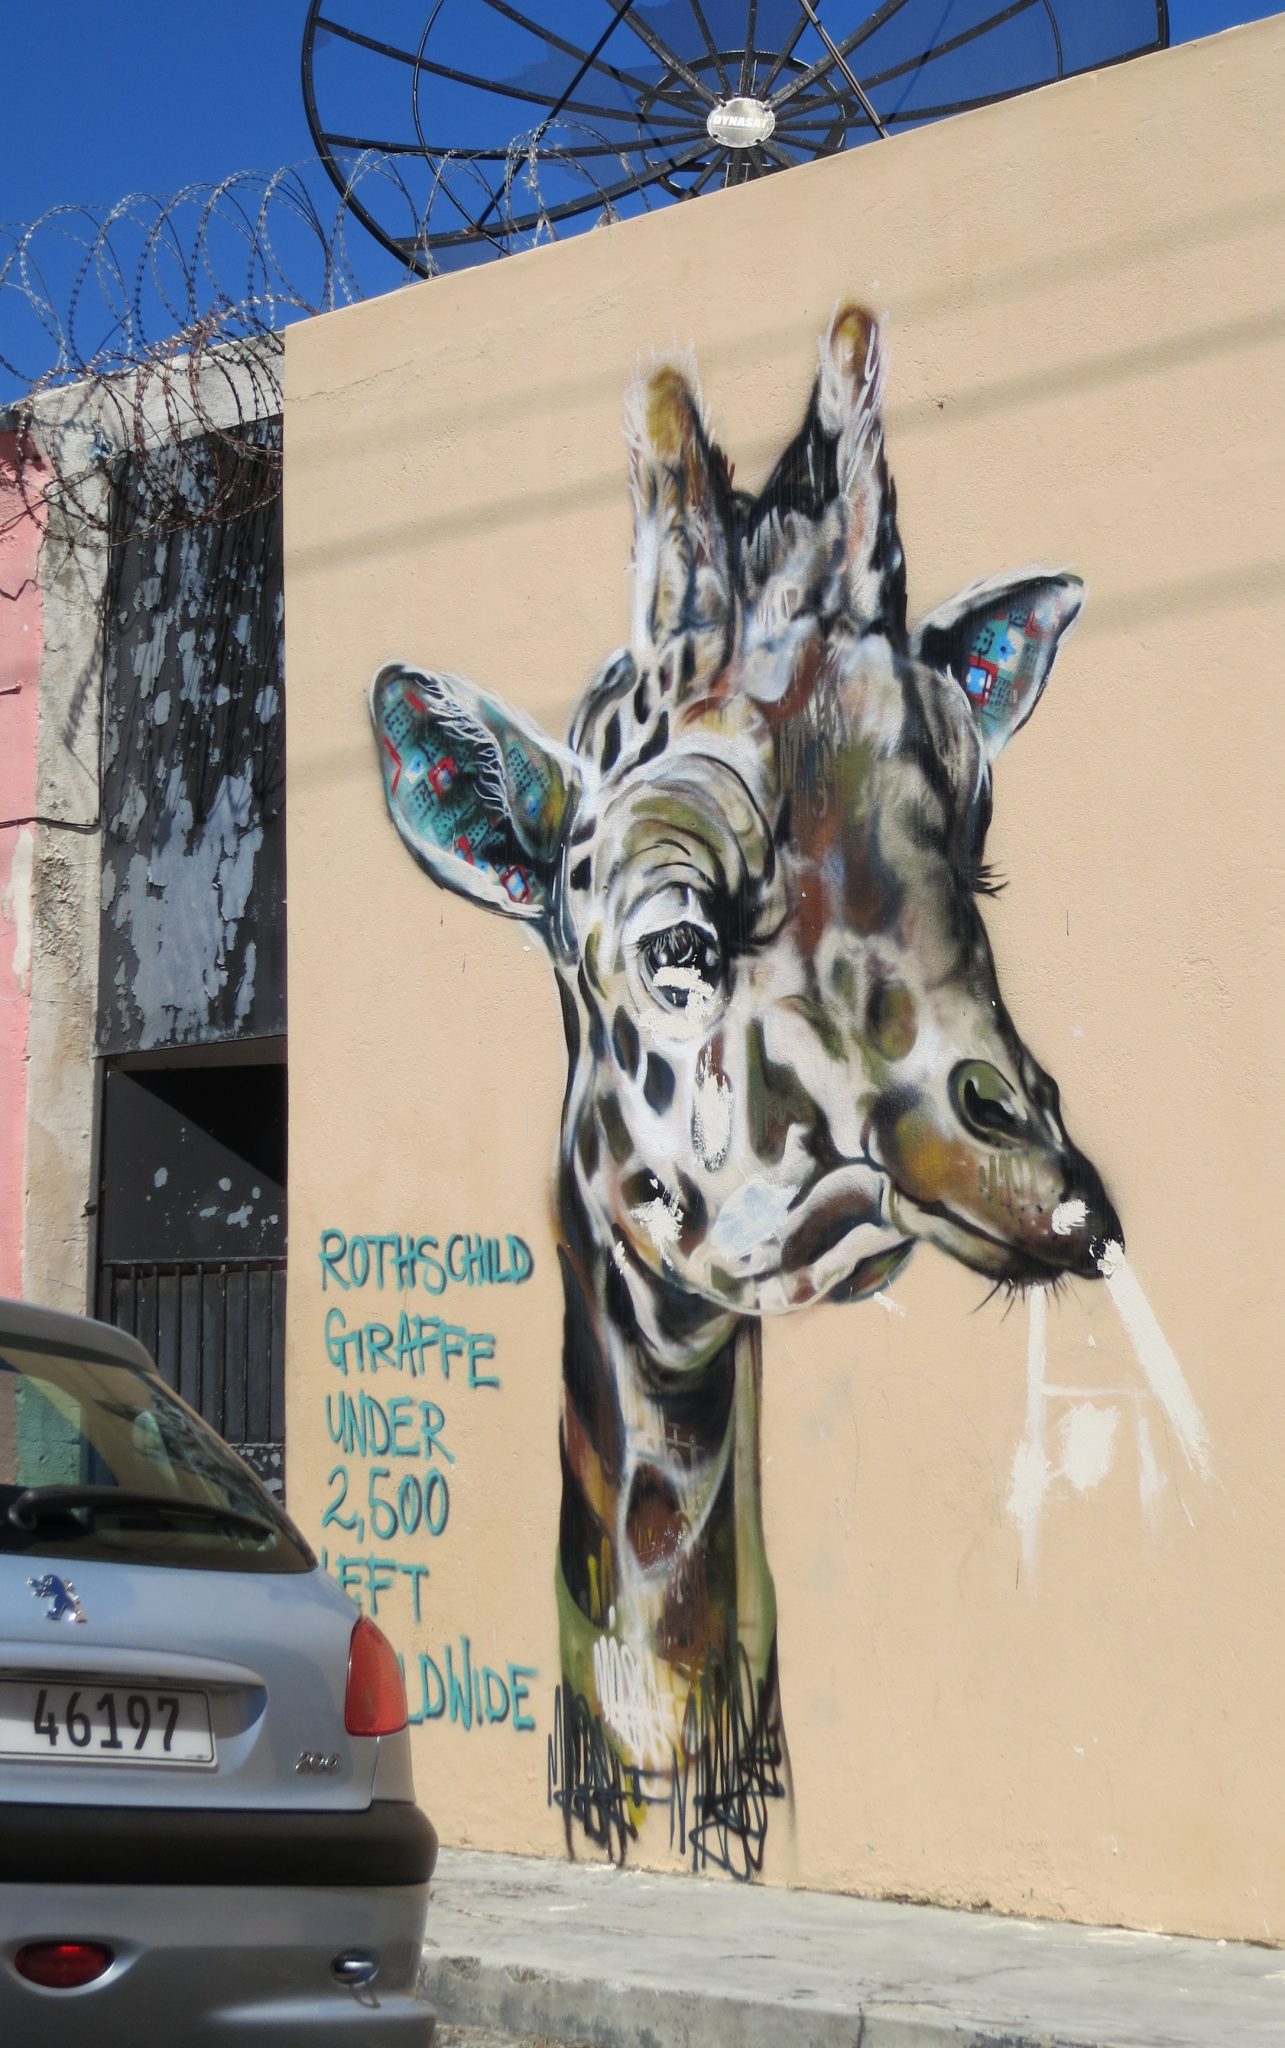 The conservation status of Rothschild Giraffe, in Cape Town. Photo: Jaques de Satage